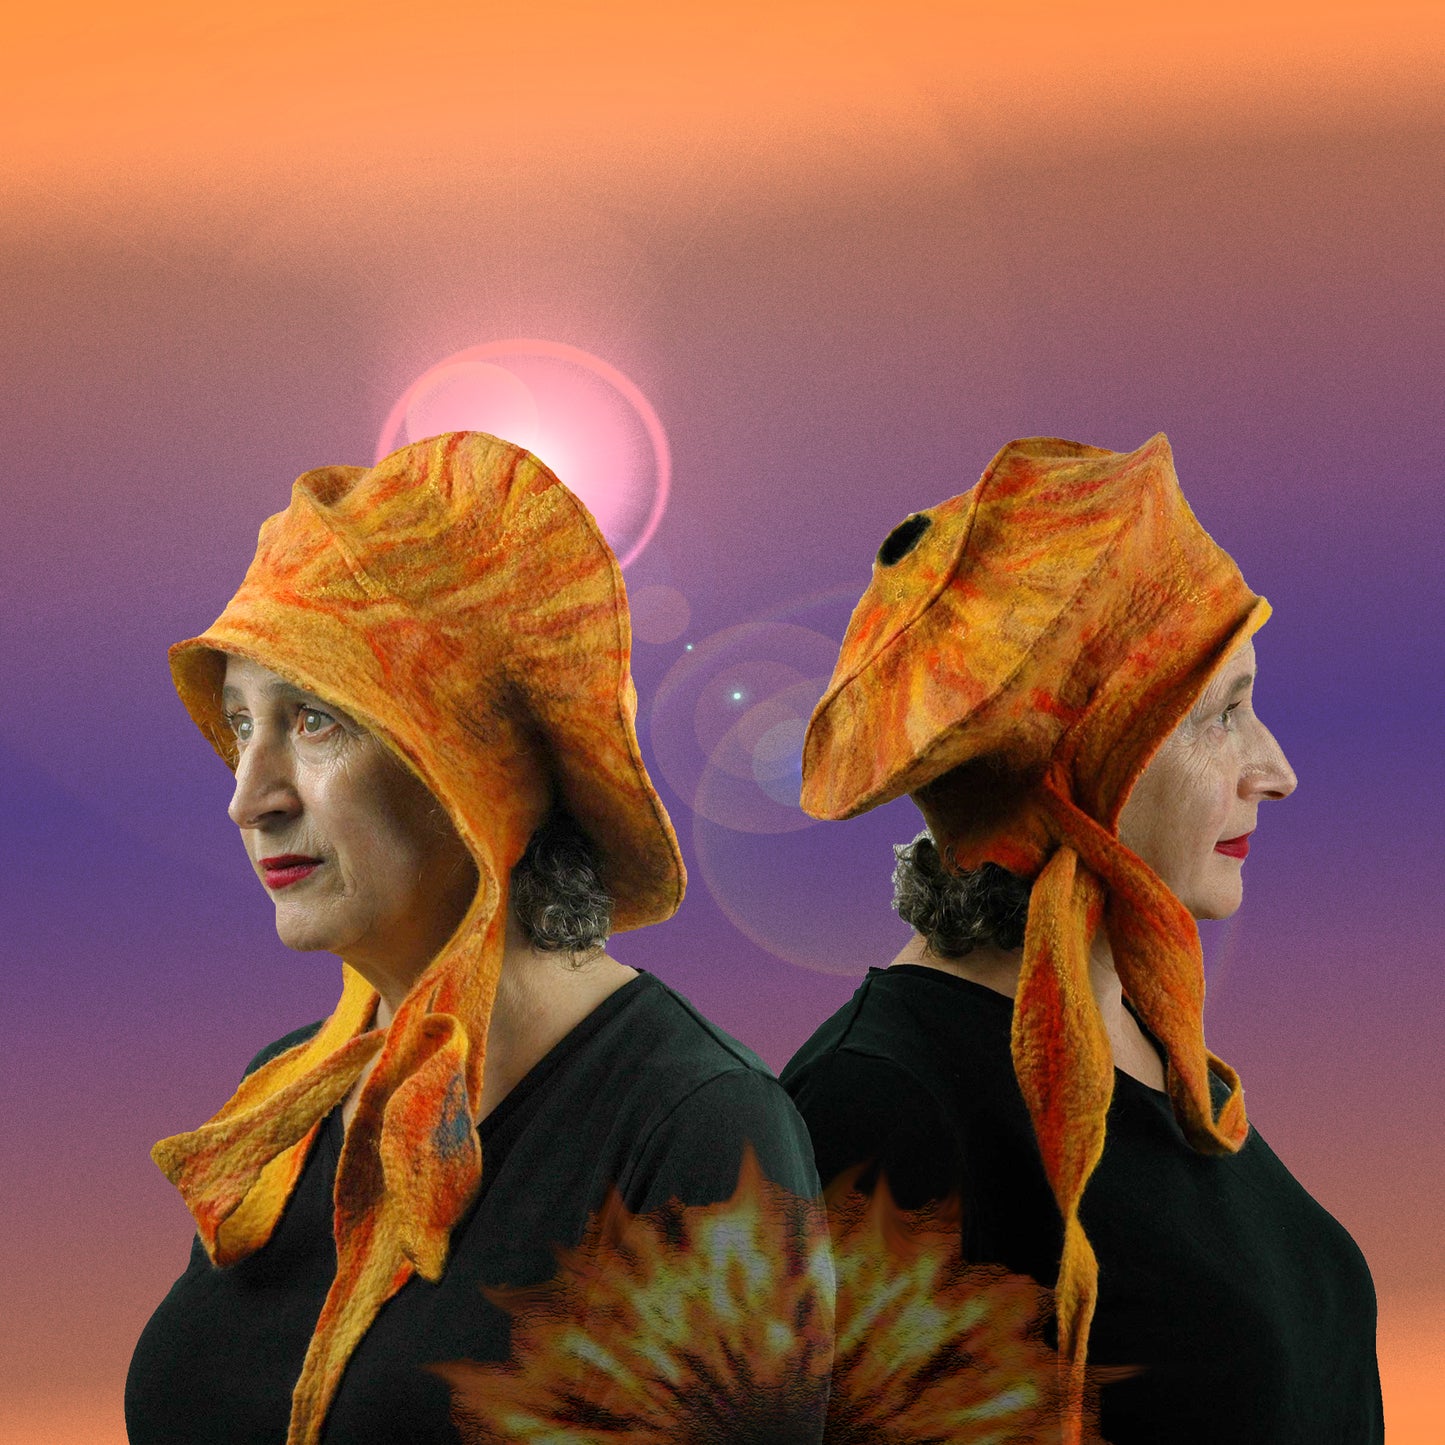 Collage of two orange-colored, Felted Fire Berets